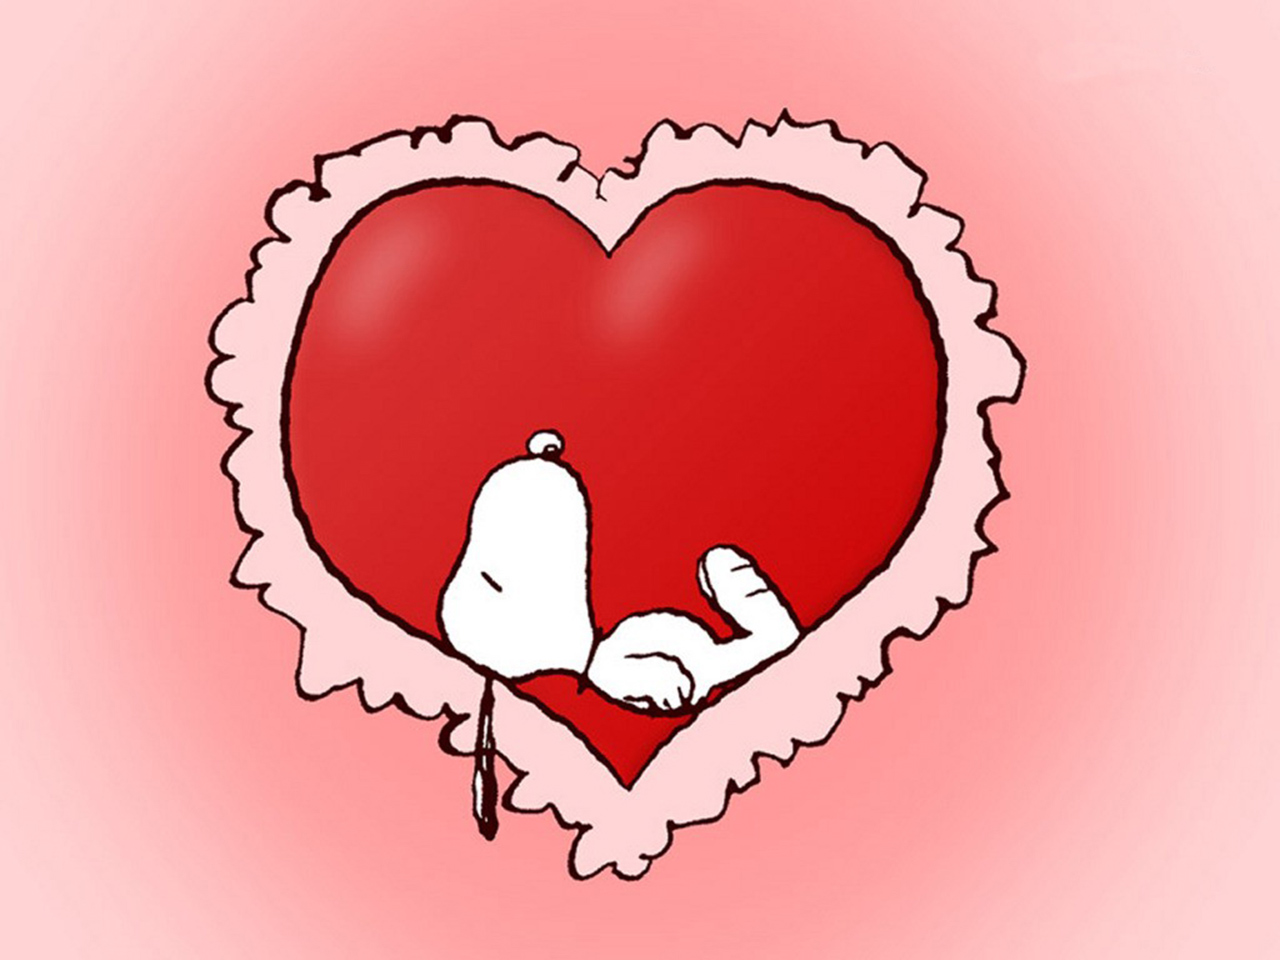 Snoopy Wallpapers HD valentine love 2